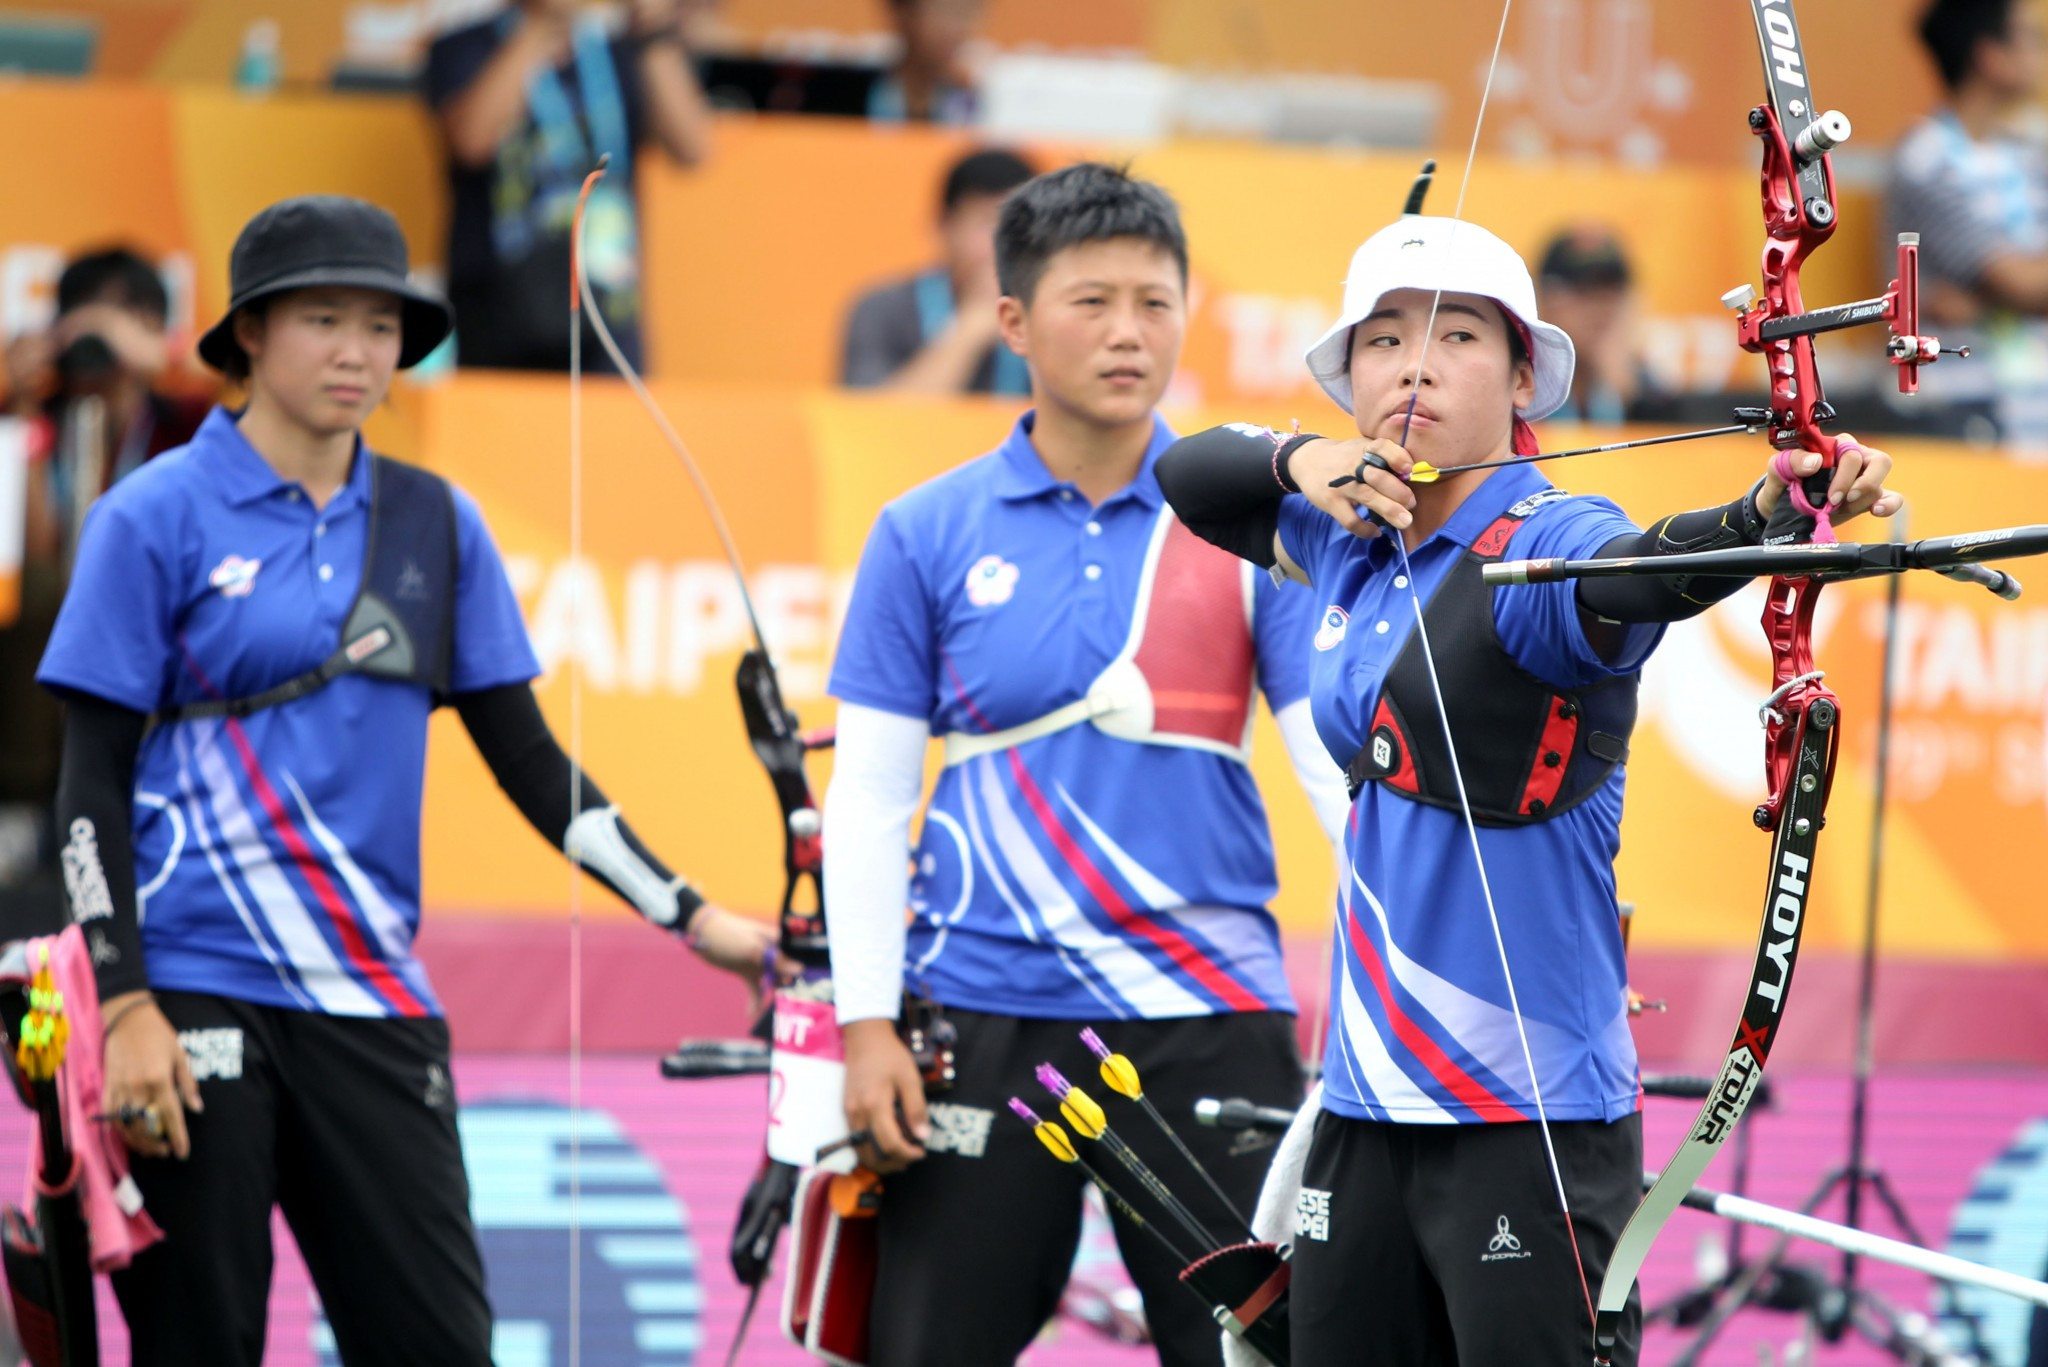 South Korea's recurve archers proved unbeatable in the gold medal matches ©Taipei 2017